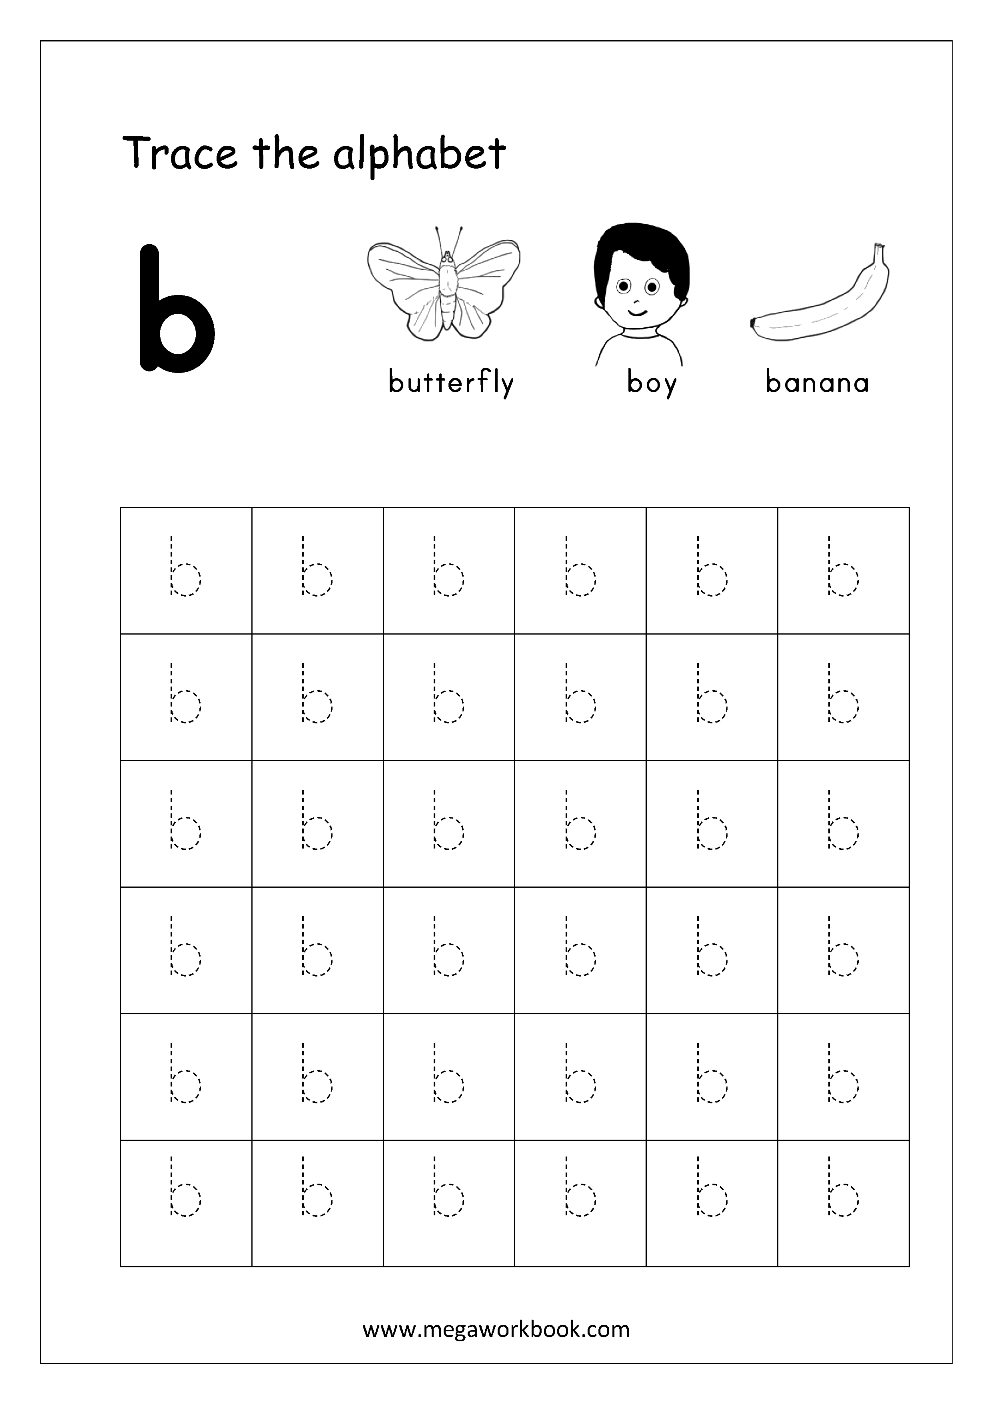 Free English Worksheets - Alphabet Tracing (Small Letters regarding Alphabet Tracing Lowercase Letters